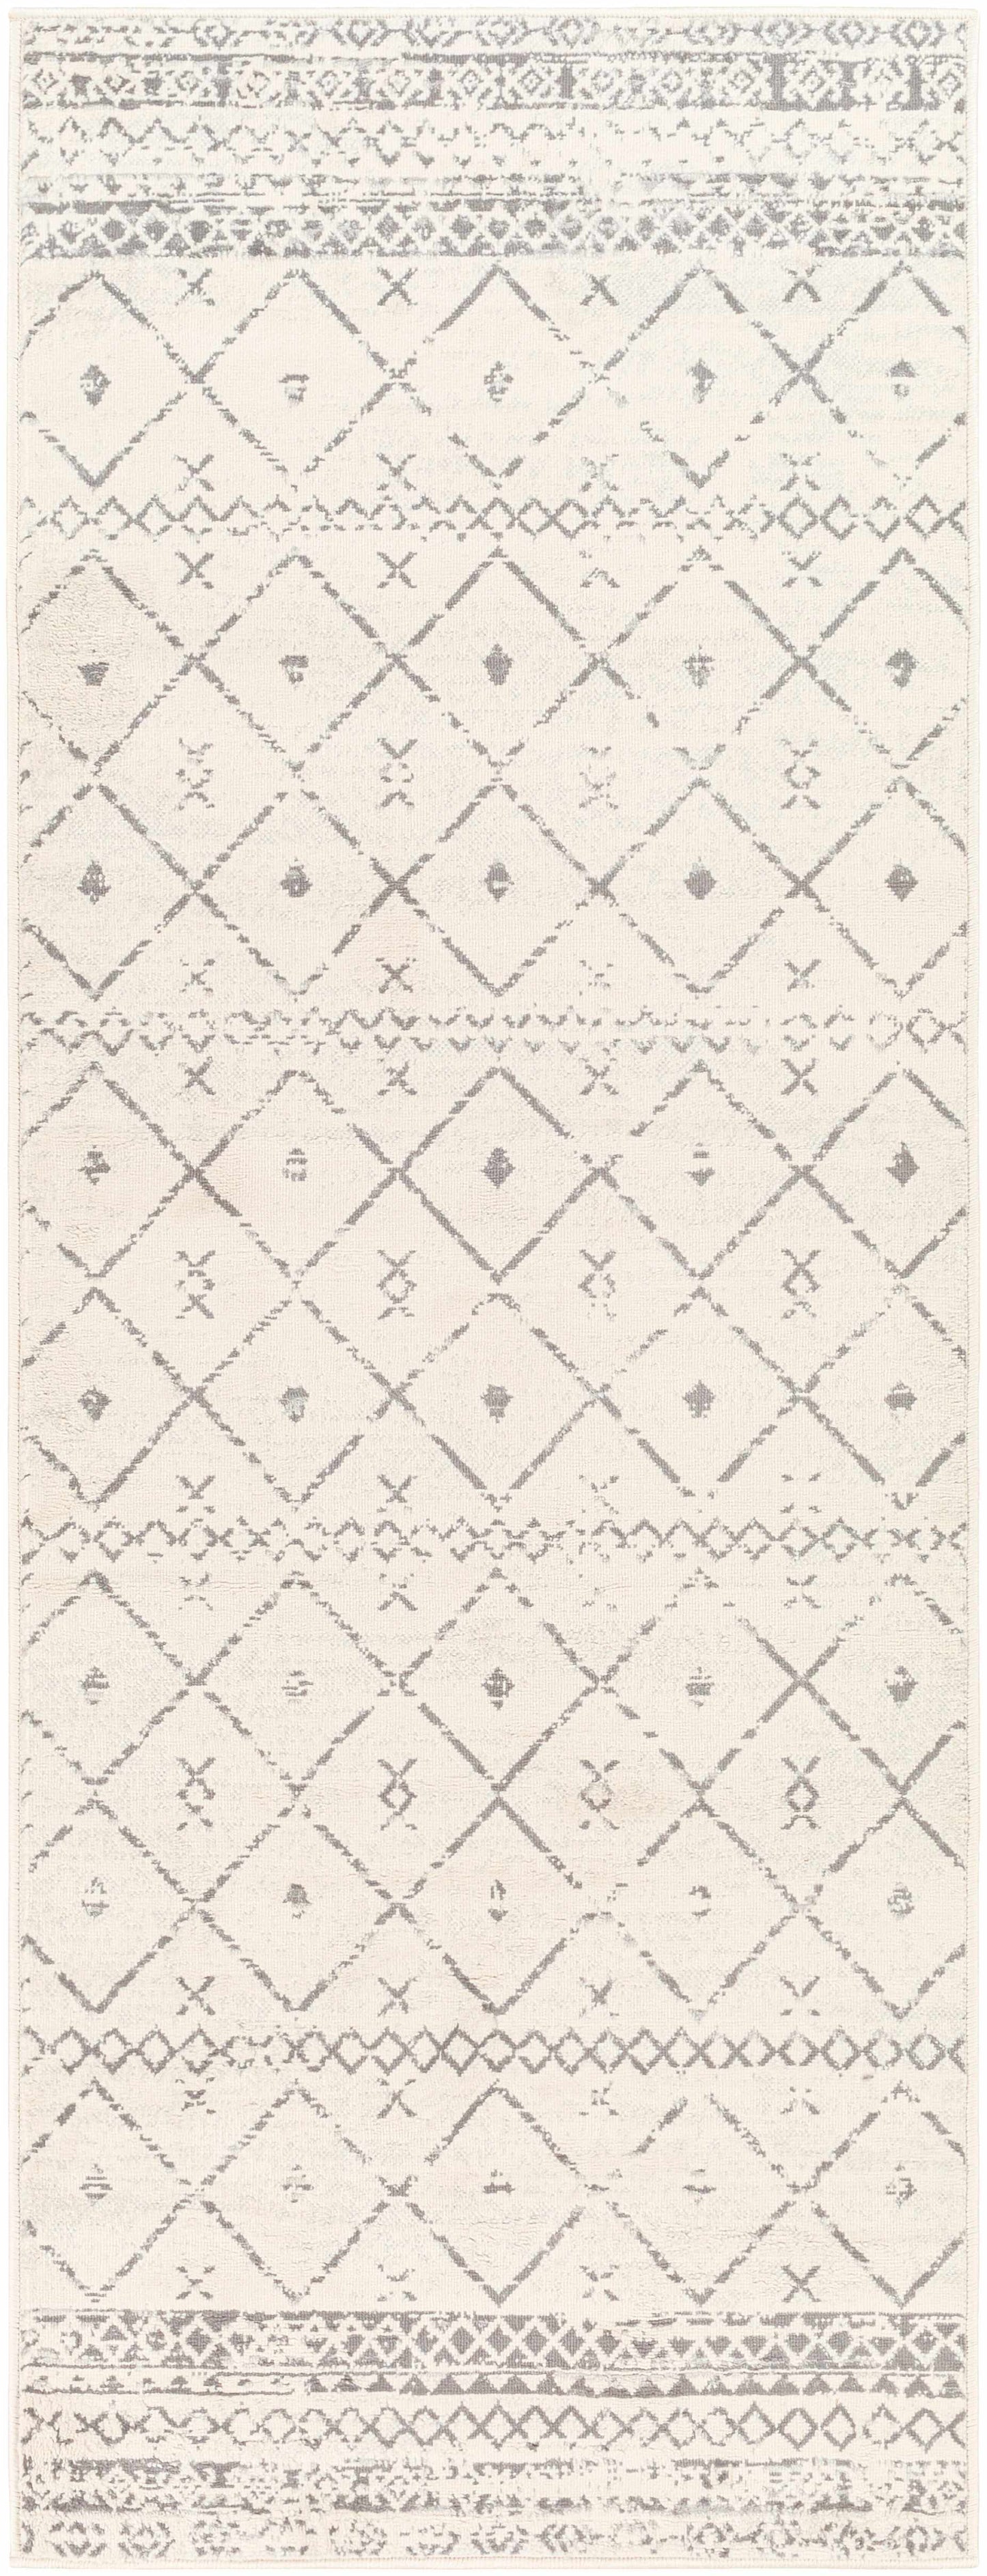 Boutique Rugs Rugs 2'7" x 7'3" Runner Newville Area Rug